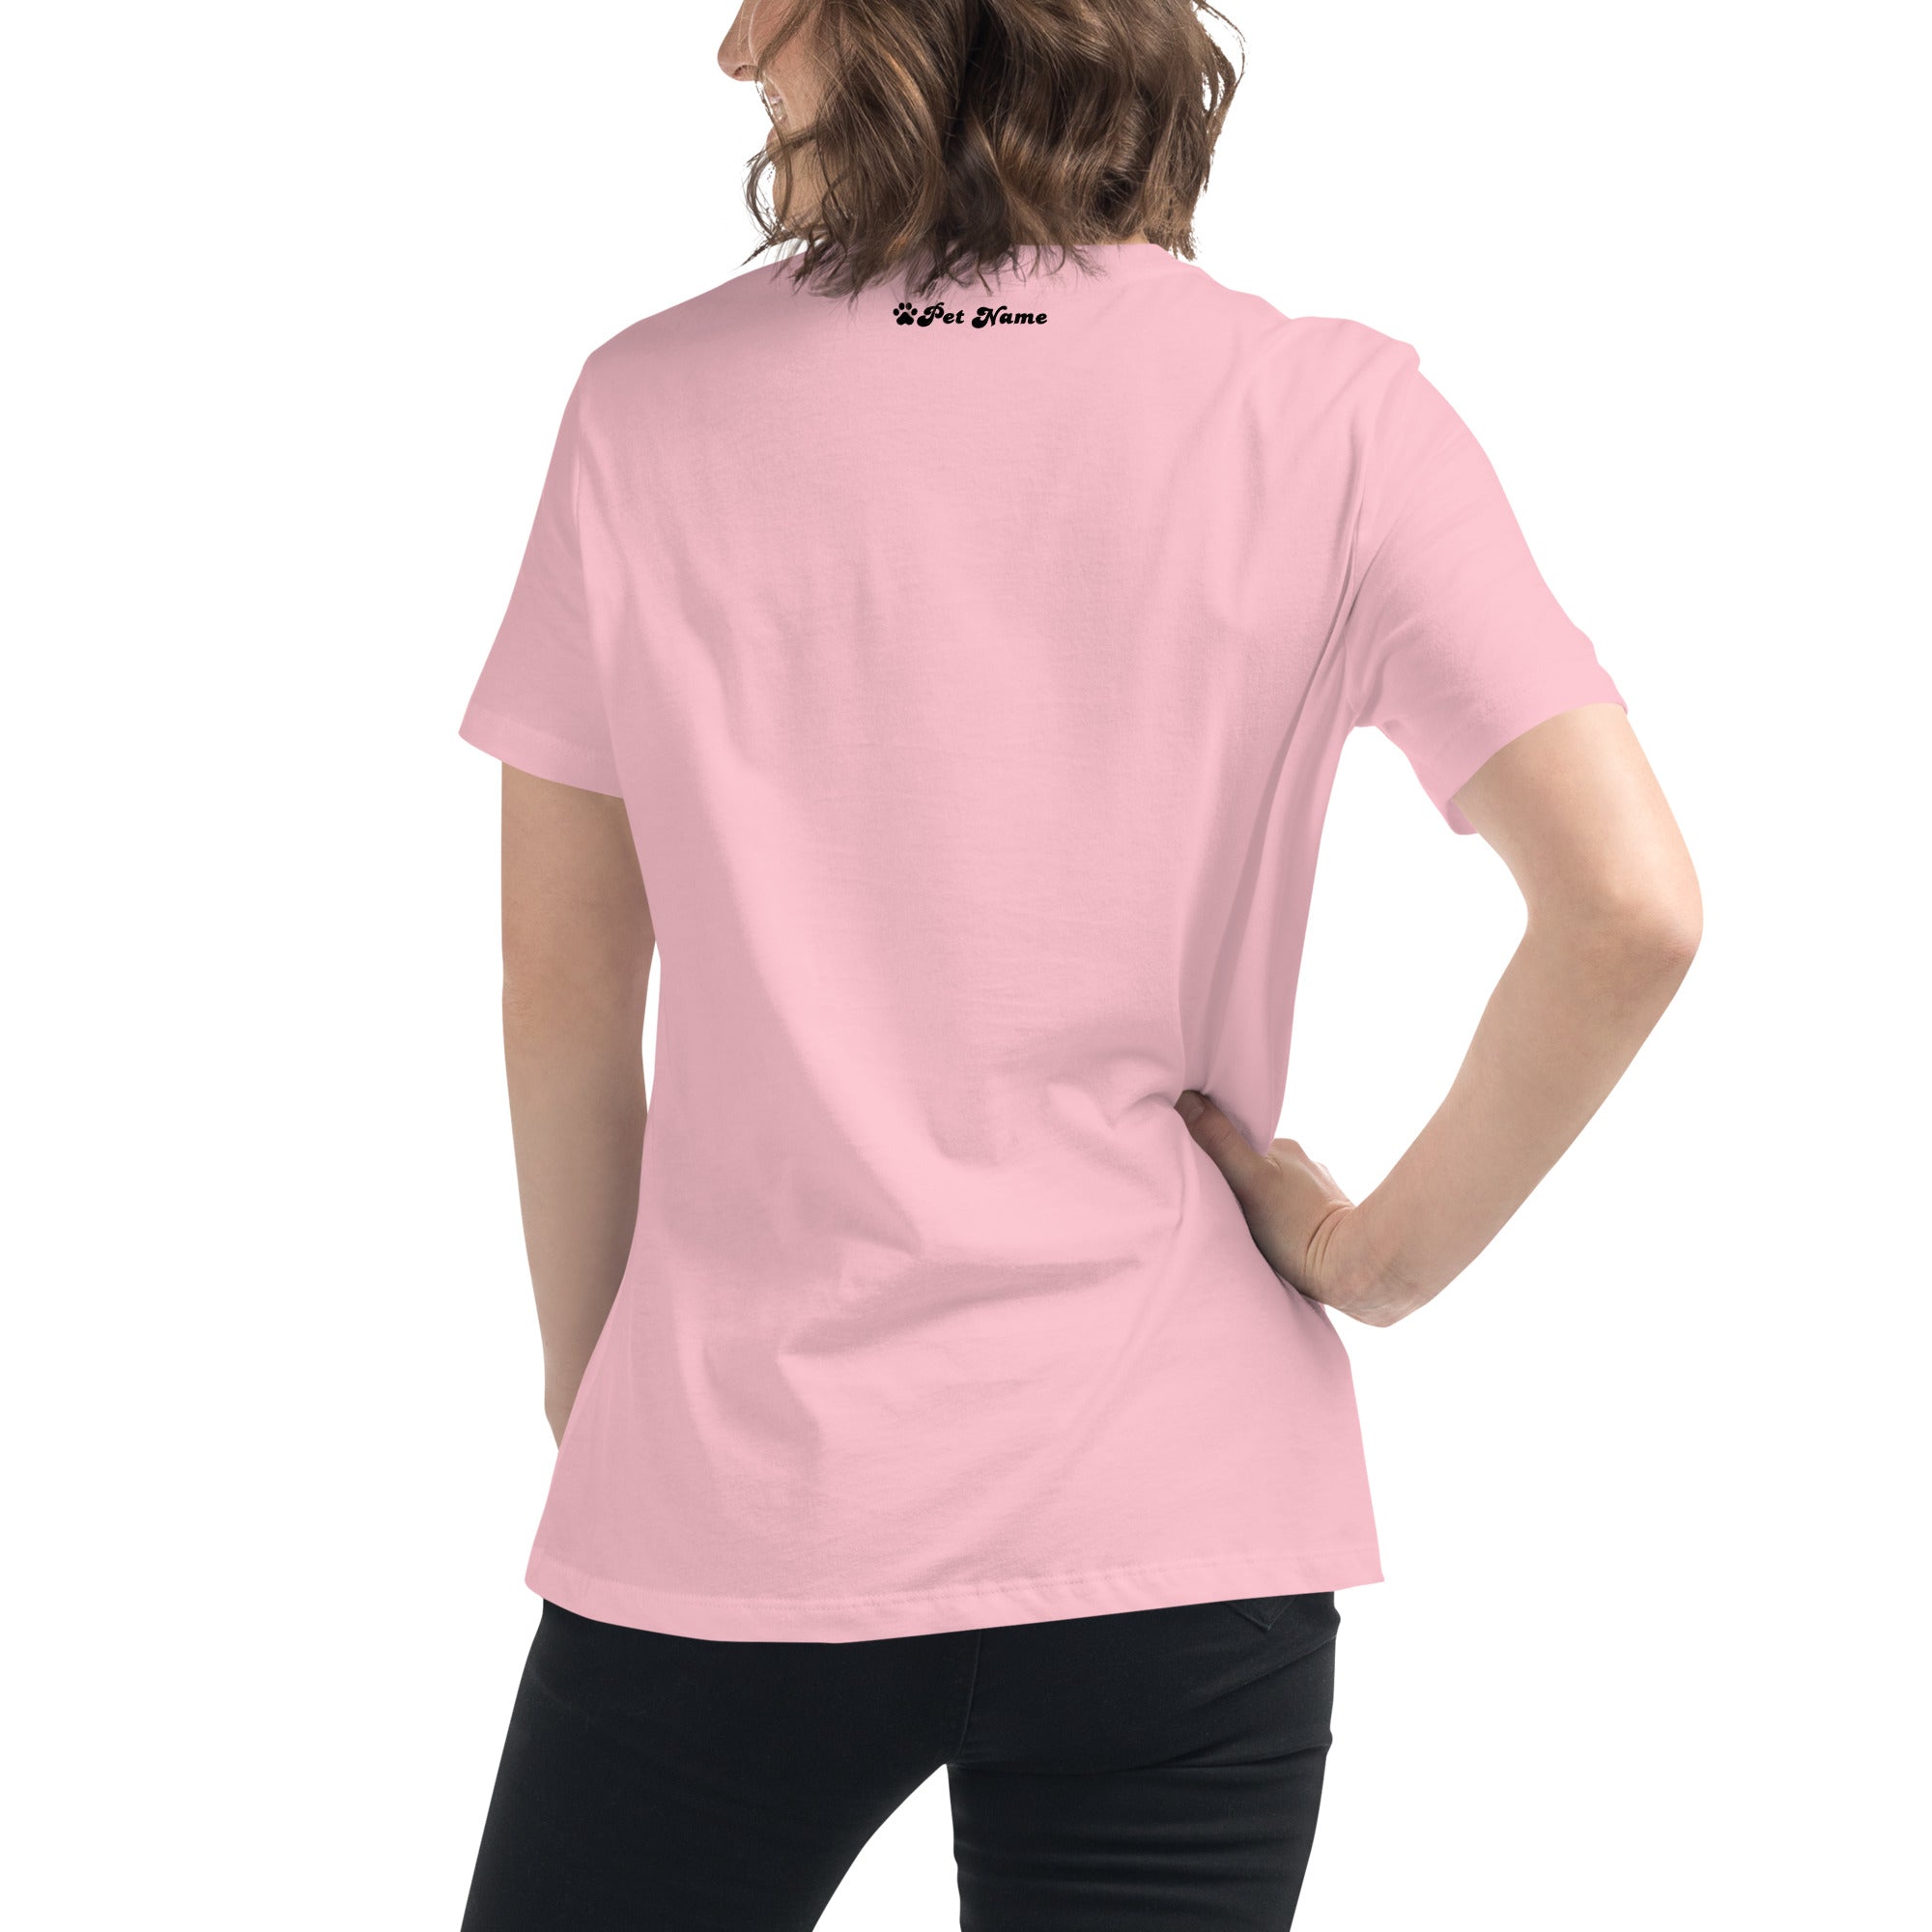 Brittany Spaniel Women's Relaxed T-Shirt